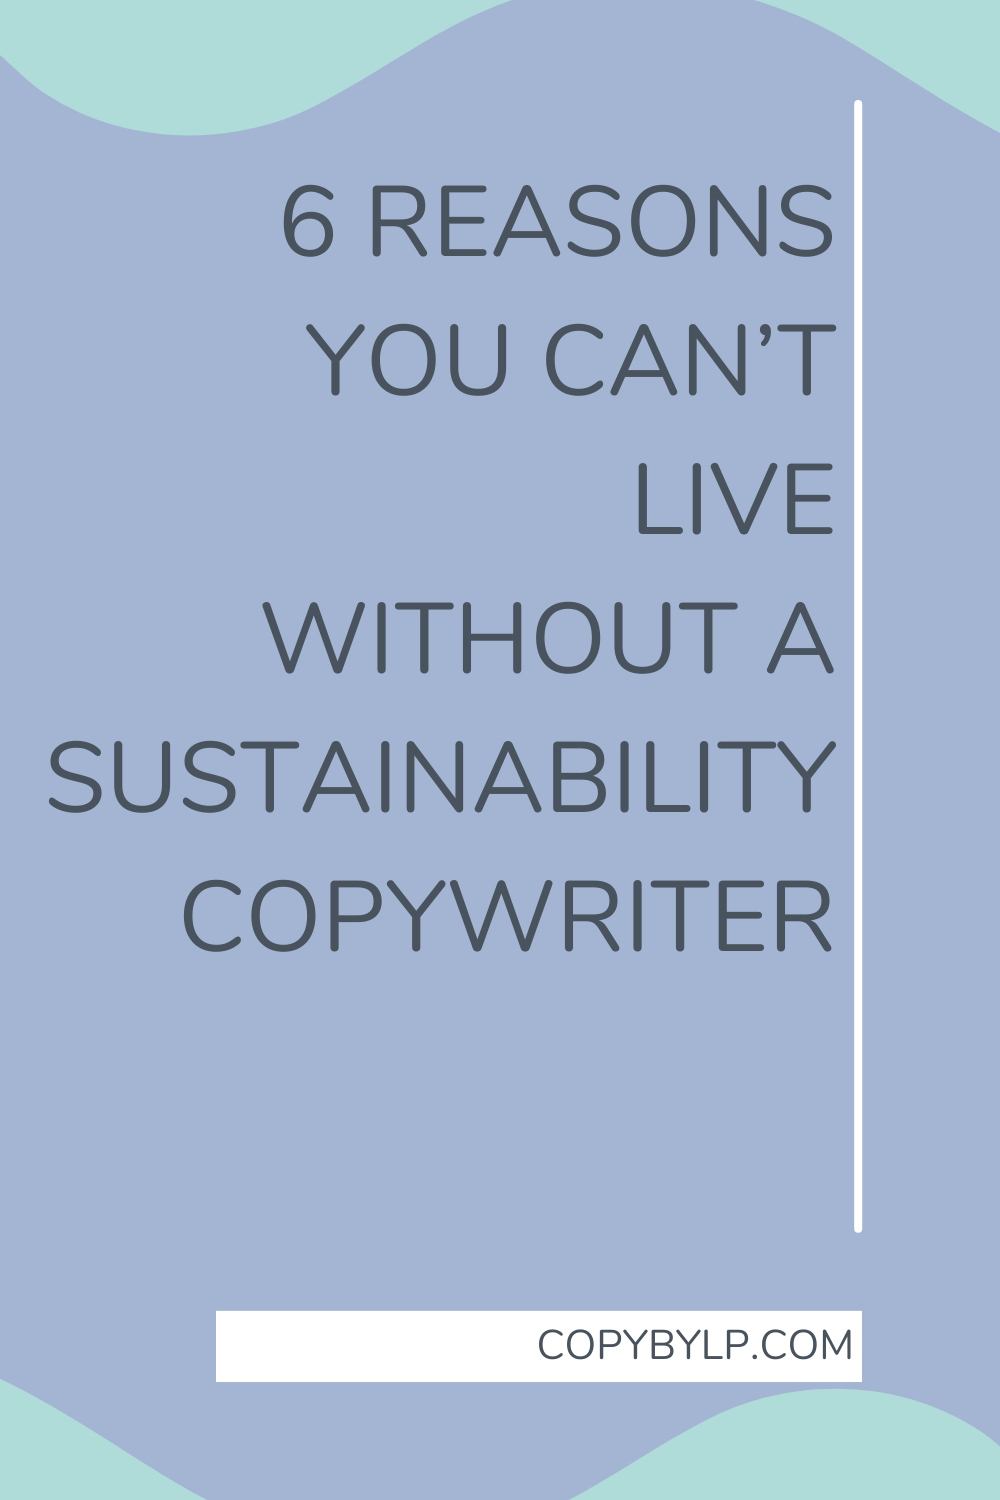 6 reasons you can’t live without a sustainability copywriter blog graphic